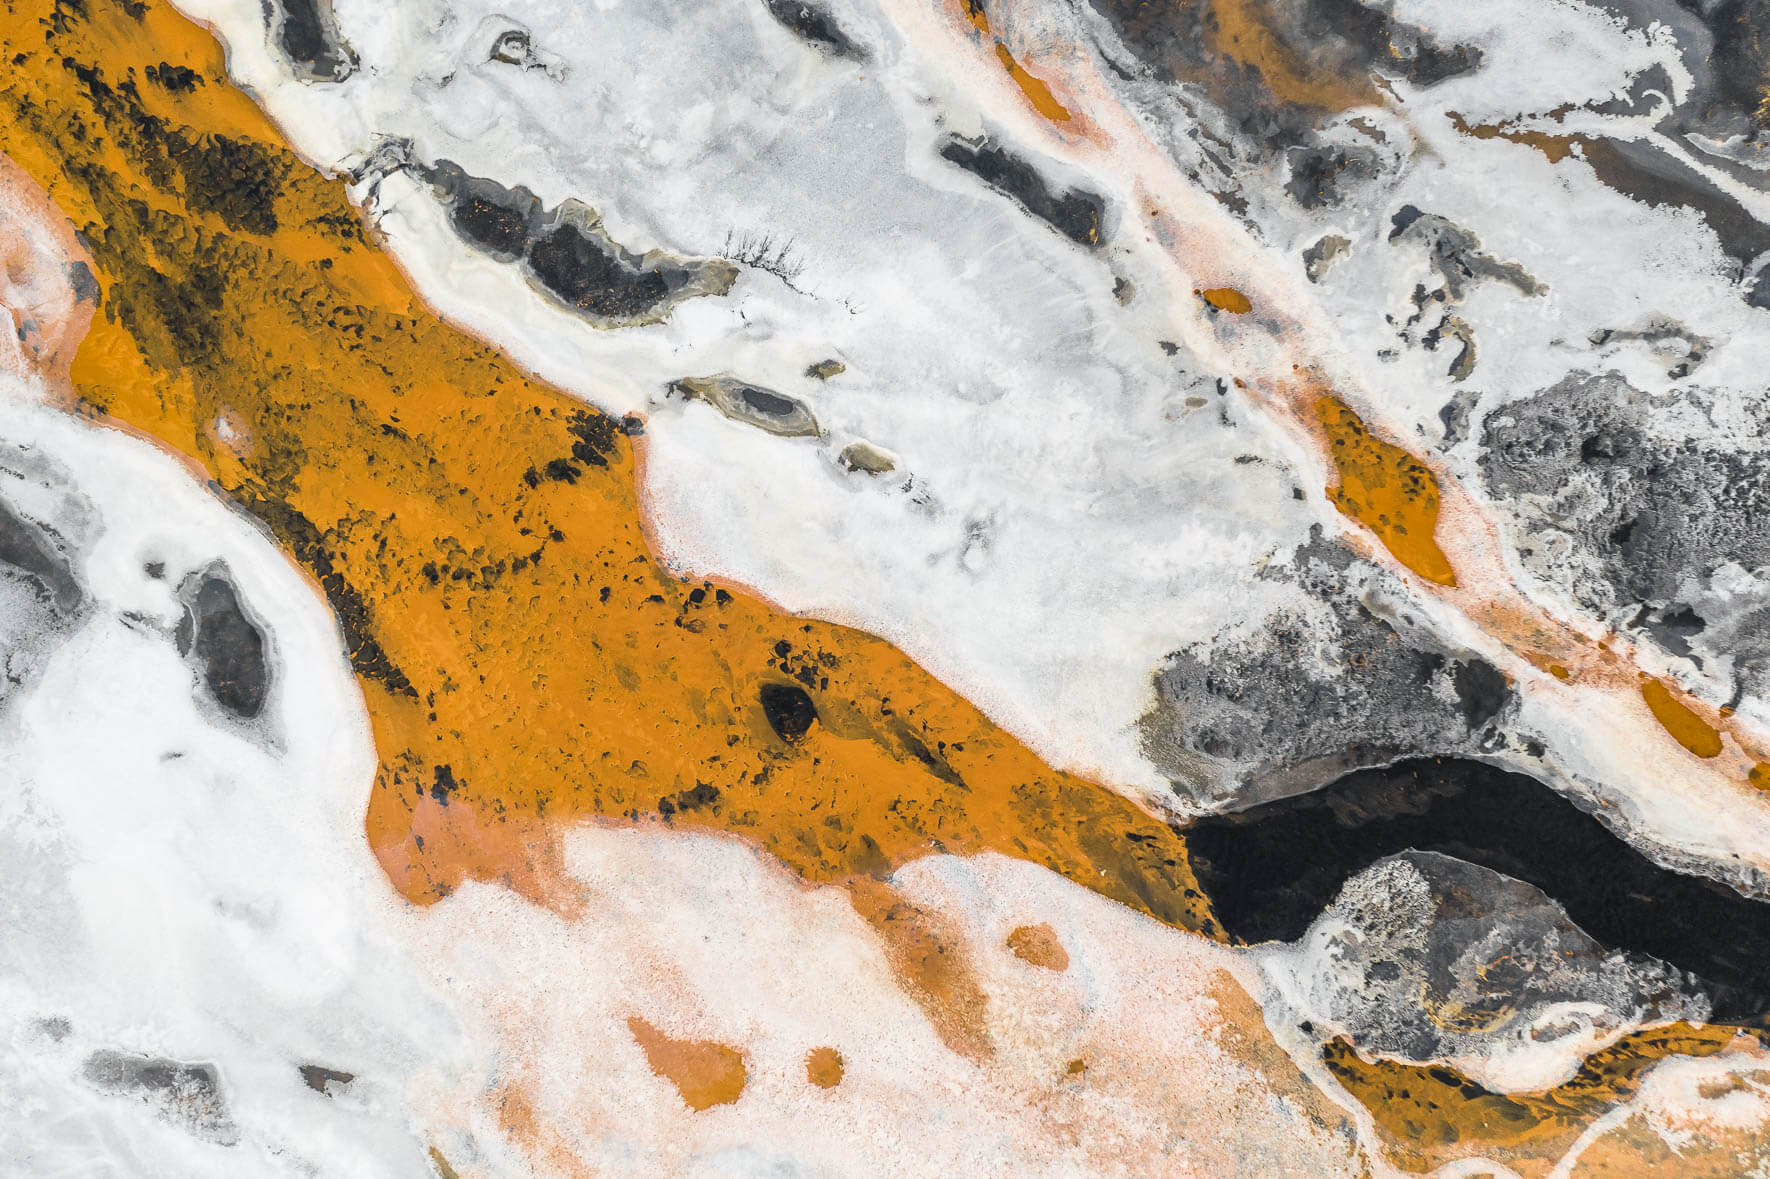 Abstract Aerial Winter Landscape of Iceland with Orange River